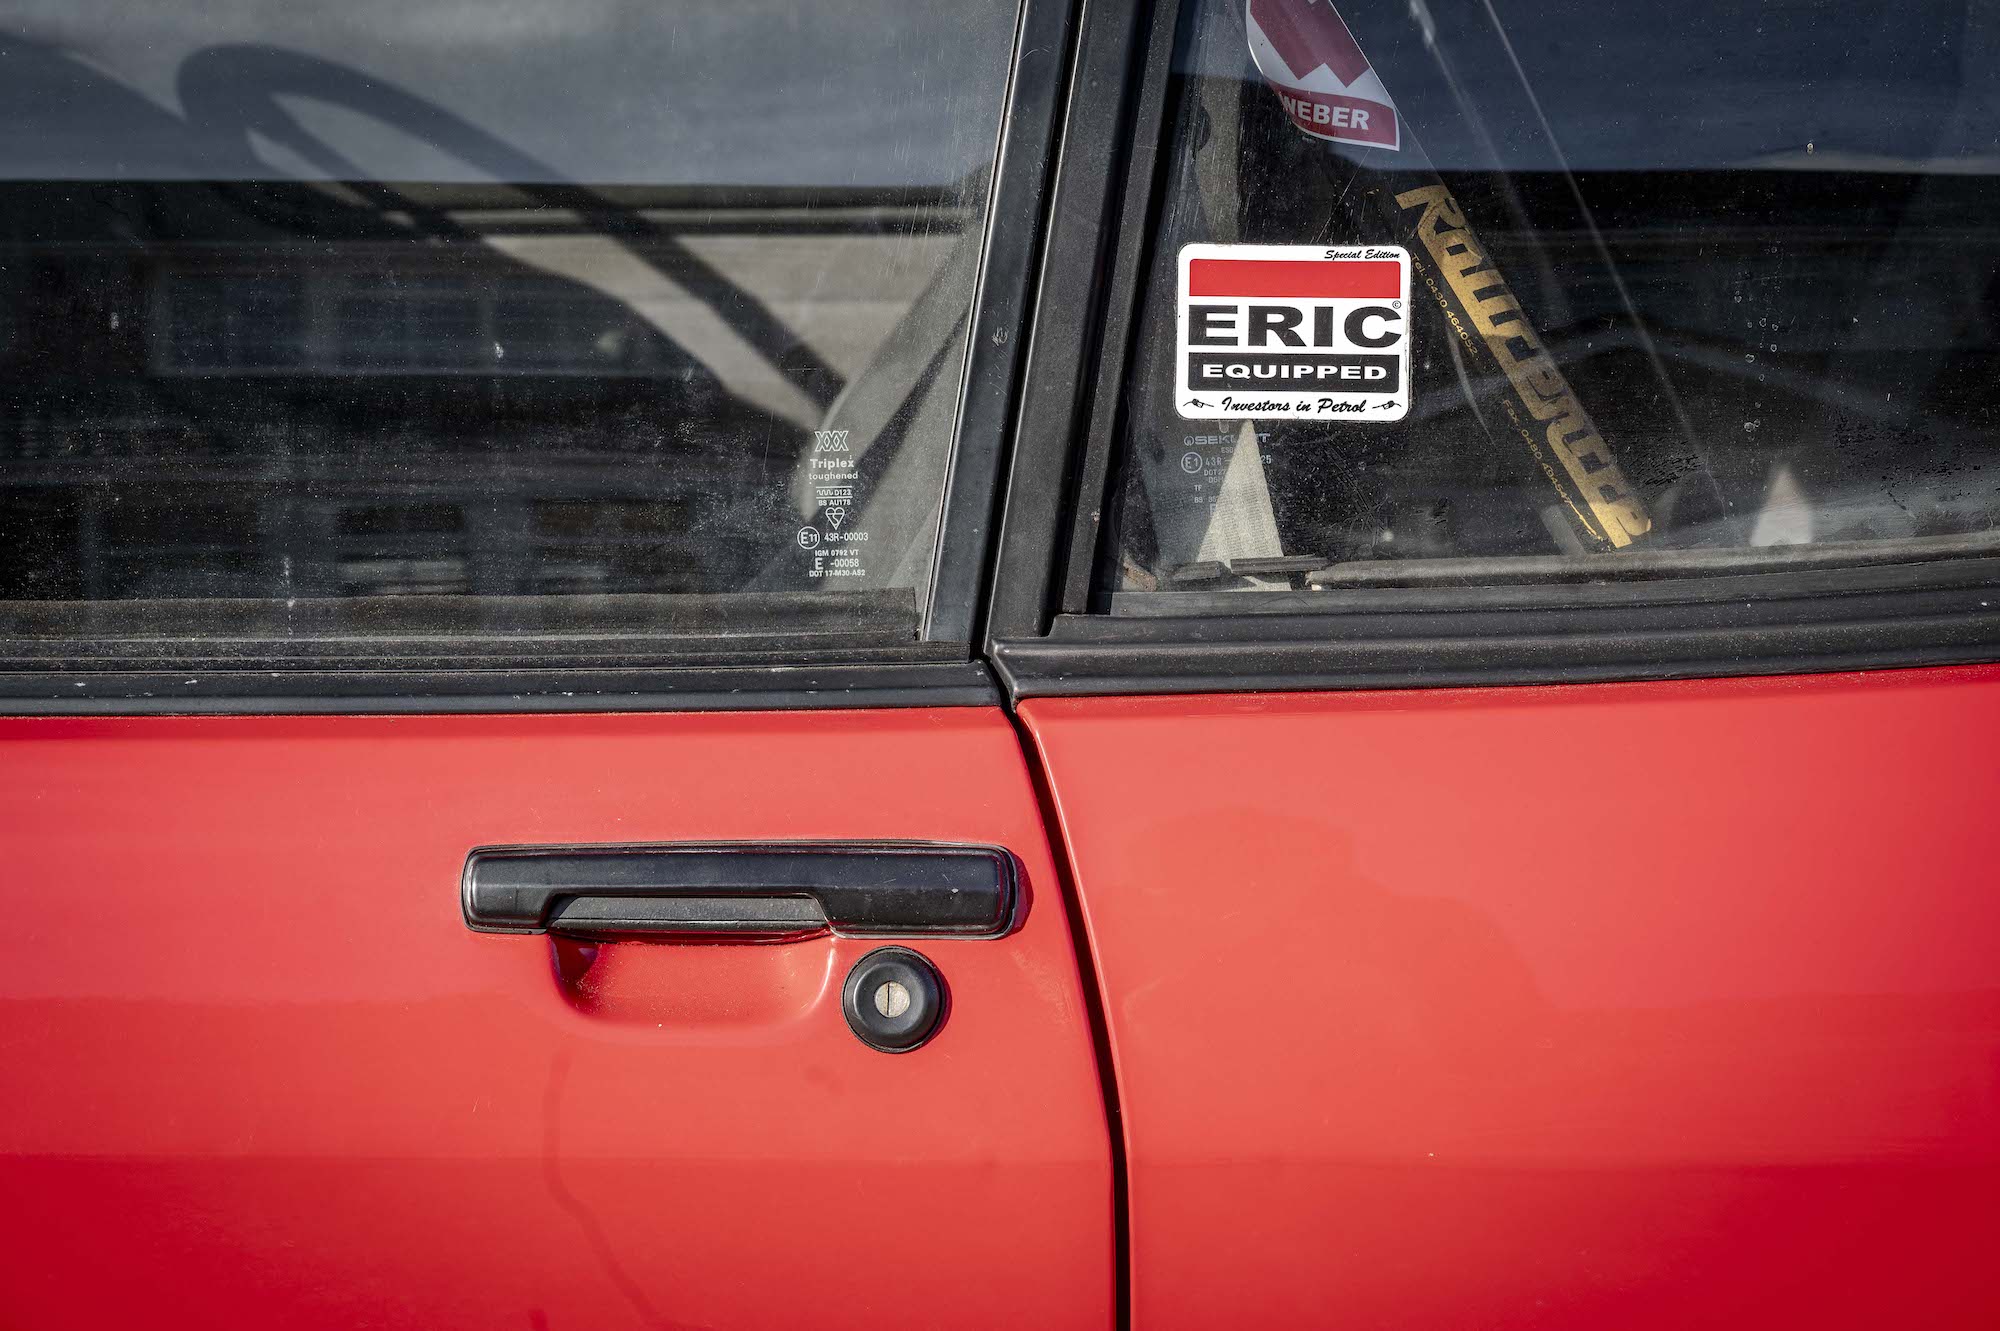 Eric Equipped sticker